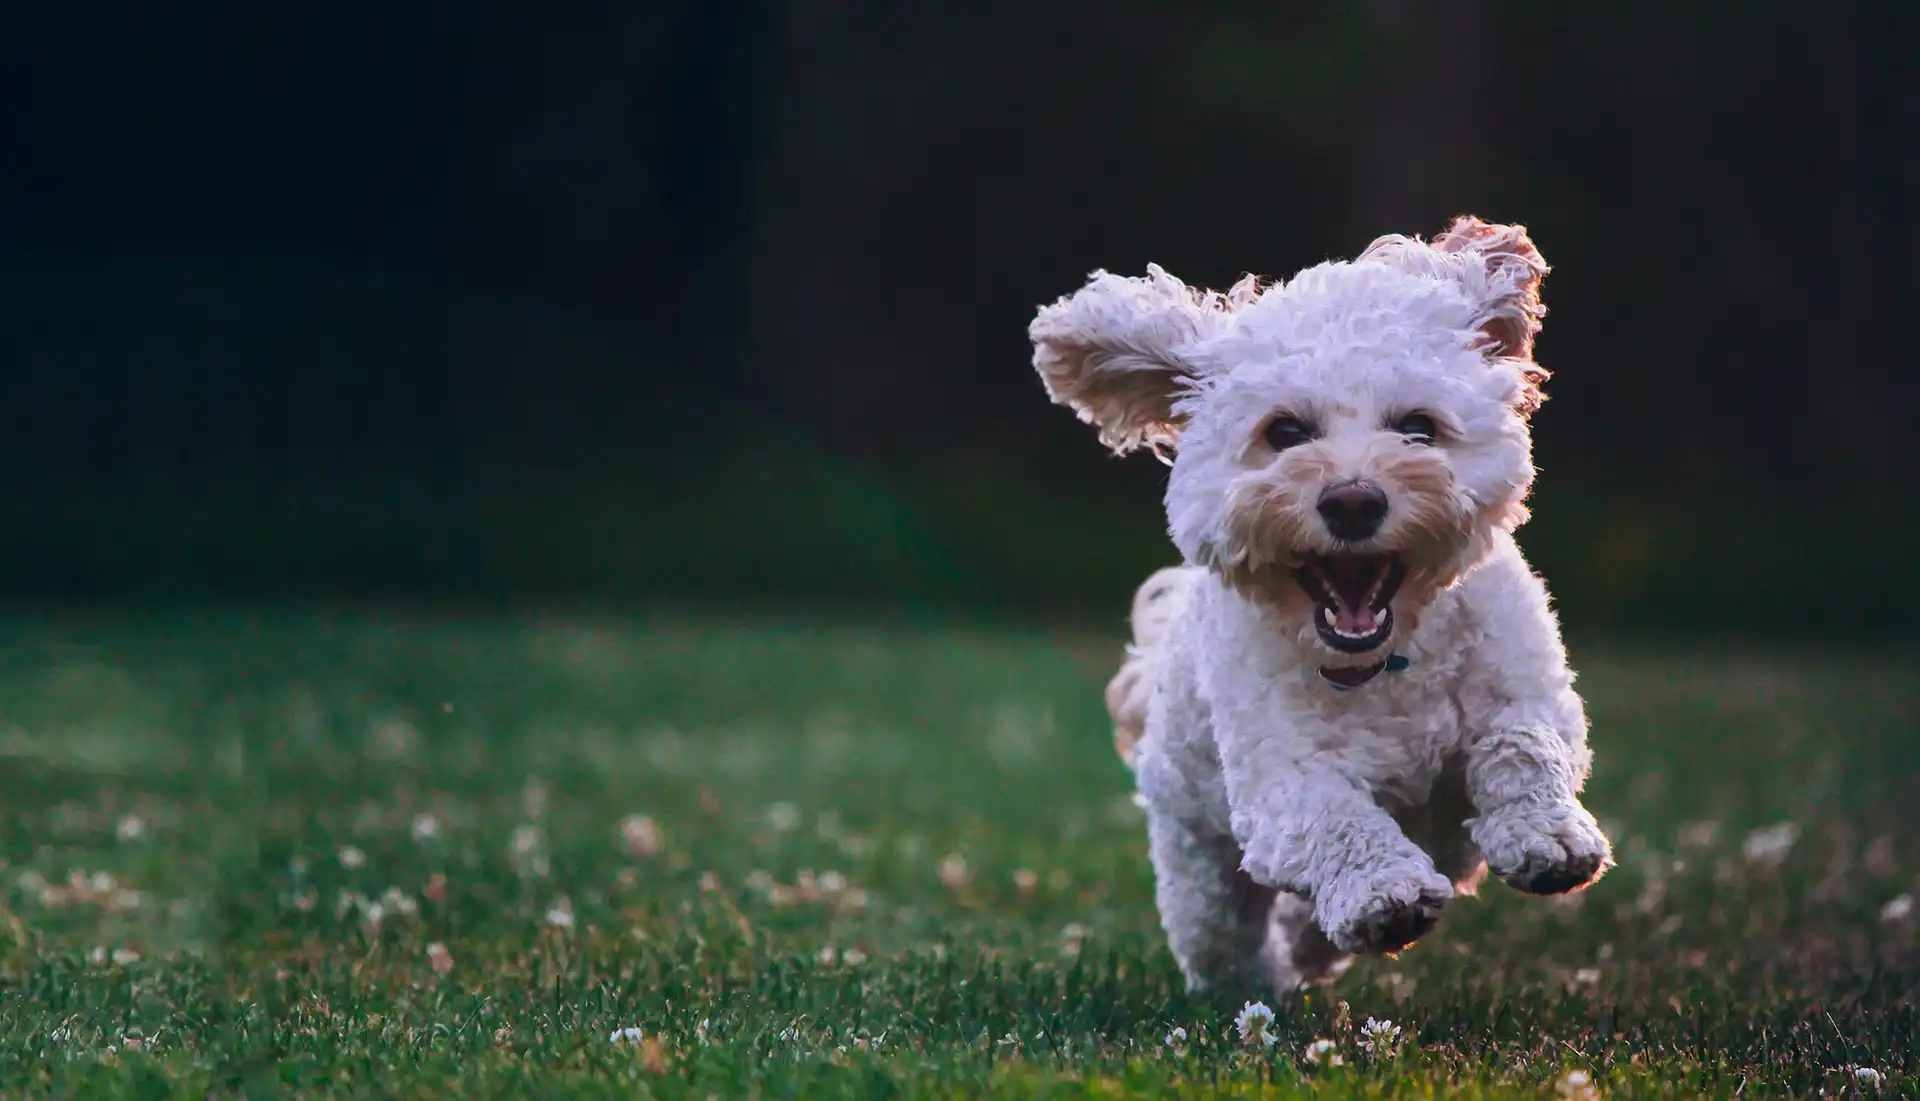 White fluffy dog running in a field of grass